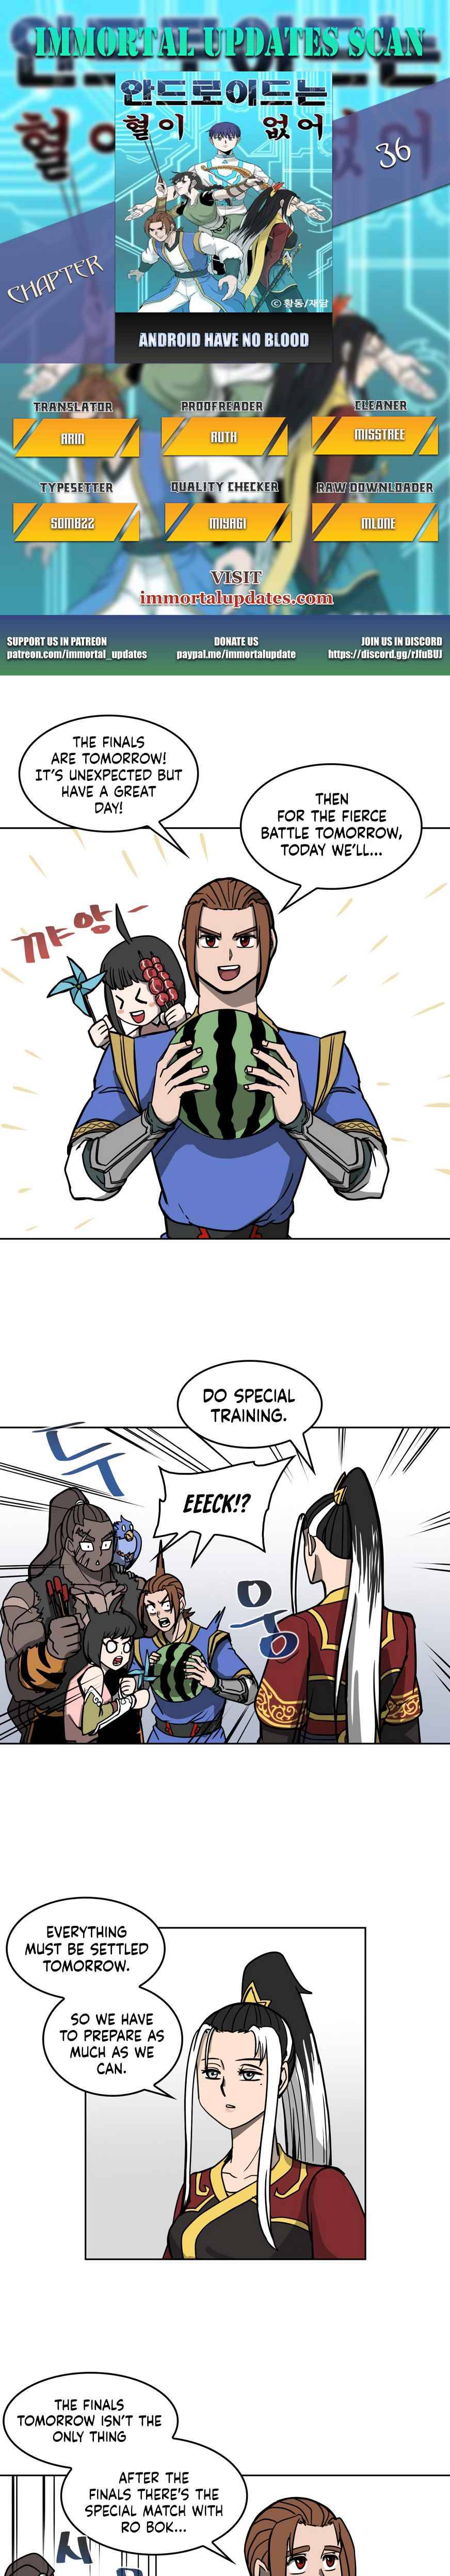 Androids Have No Blood - Page 1